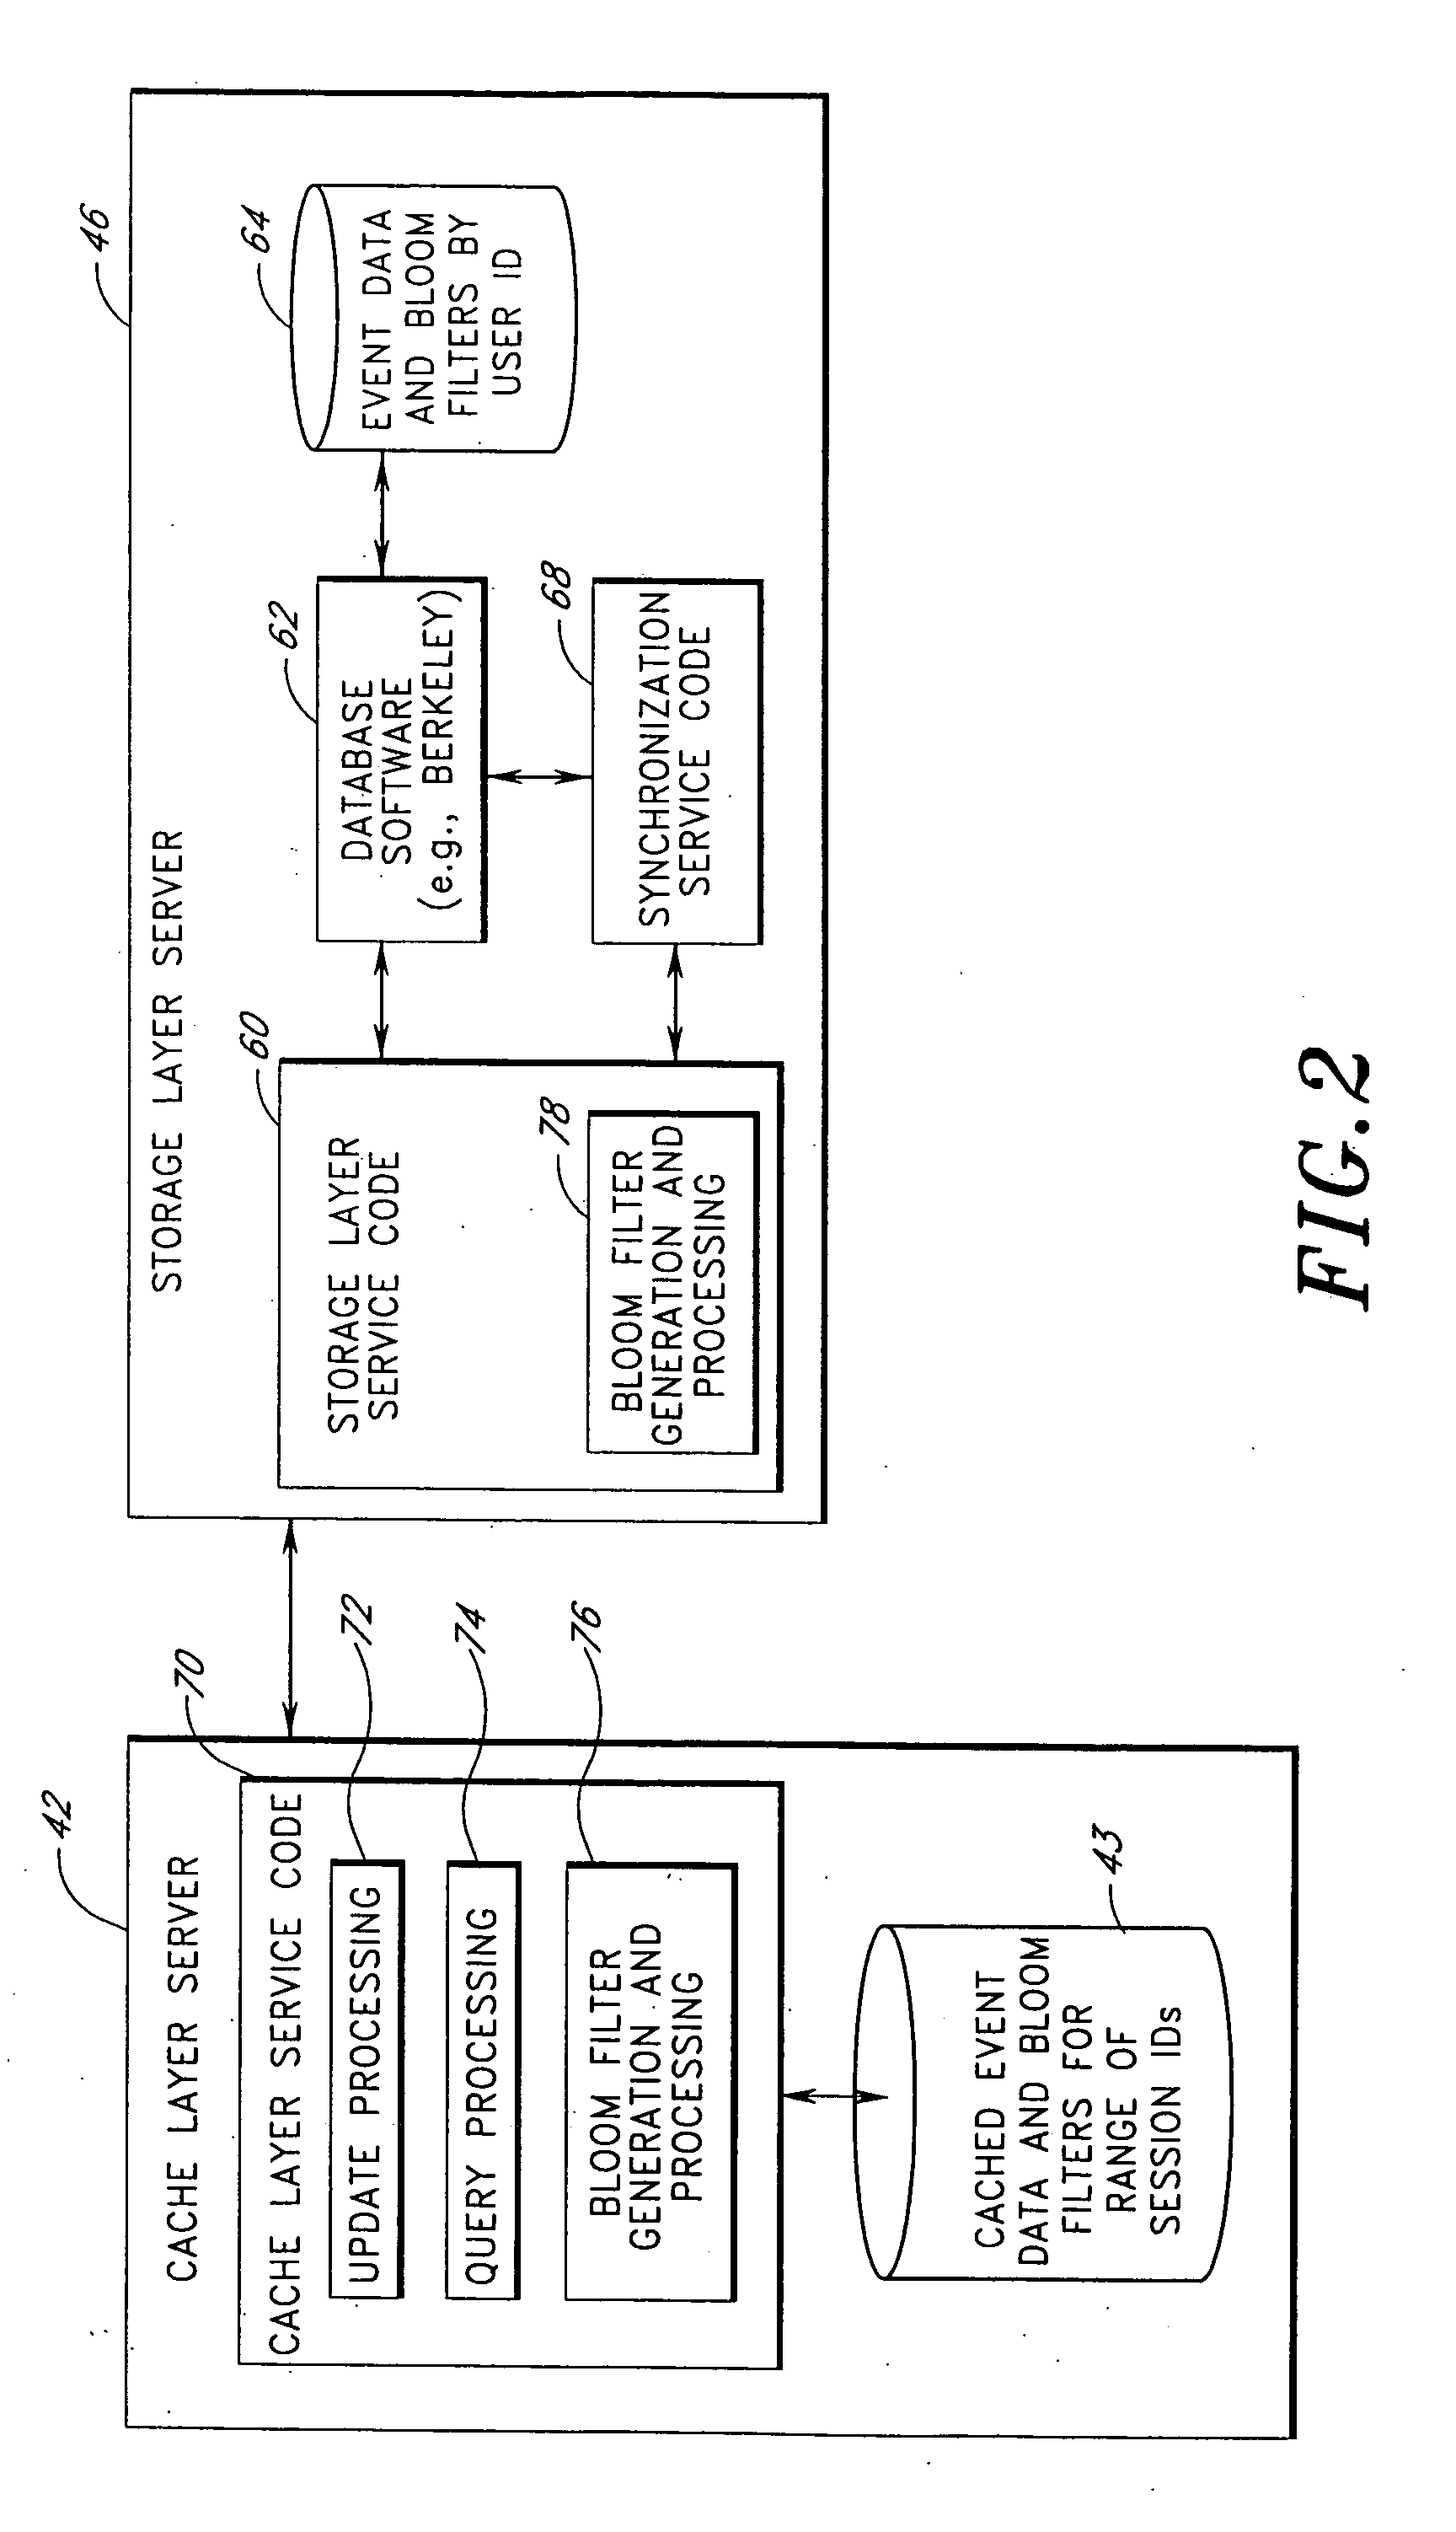 Server architecture and methods for persistently storing and serving event data